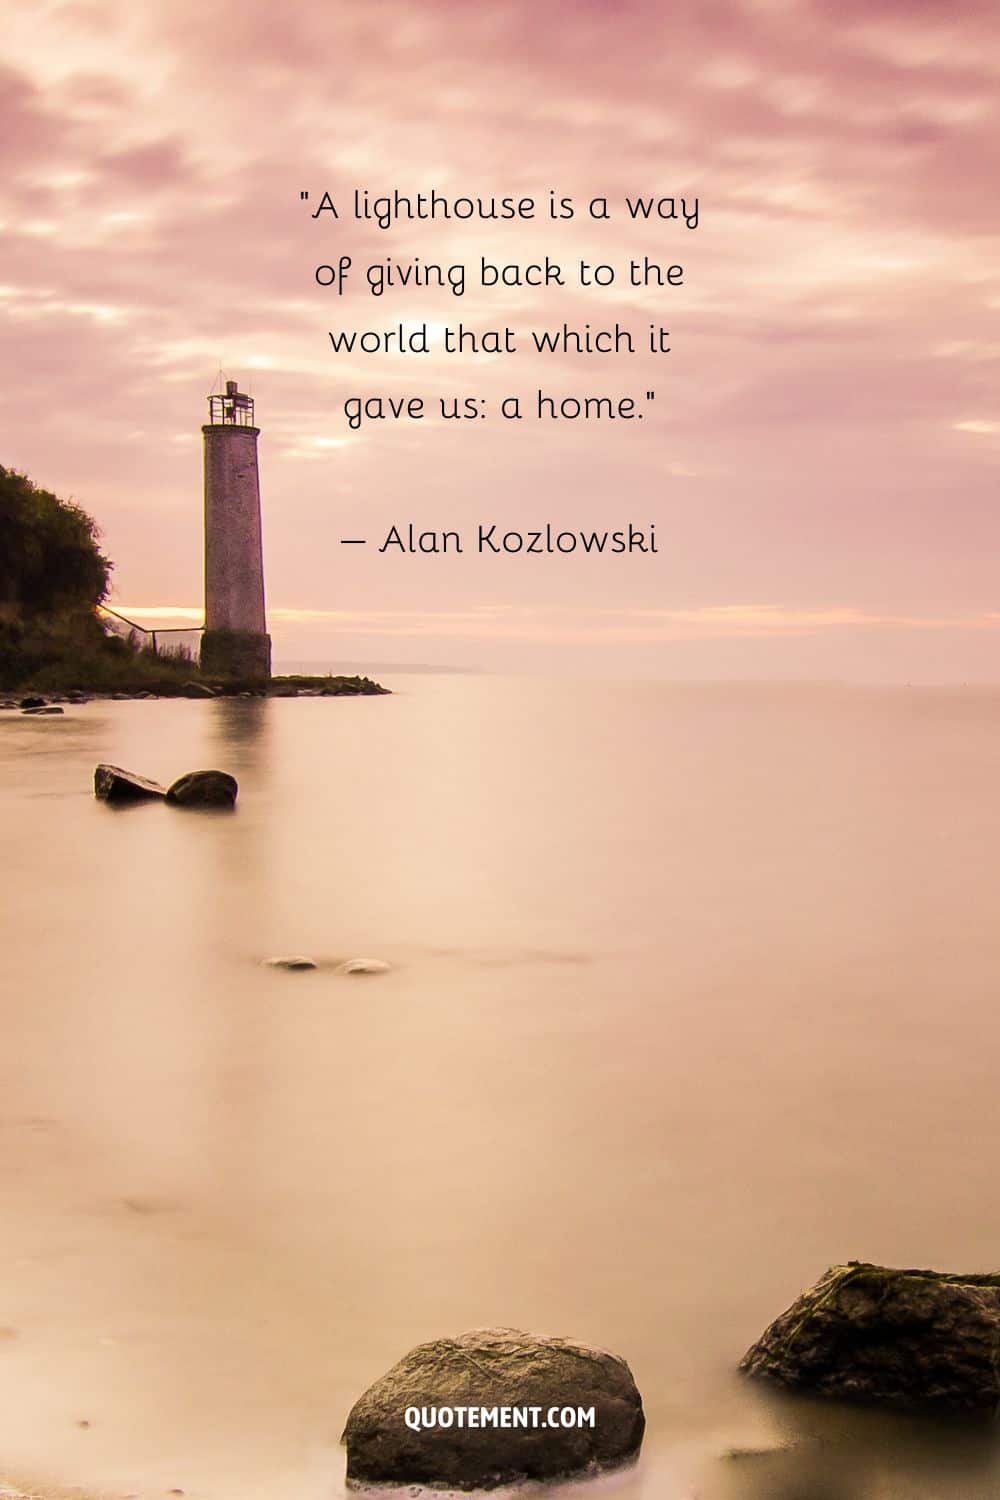 Mind-blowing quote by Alan Kozlowski and a lighthouse in the background